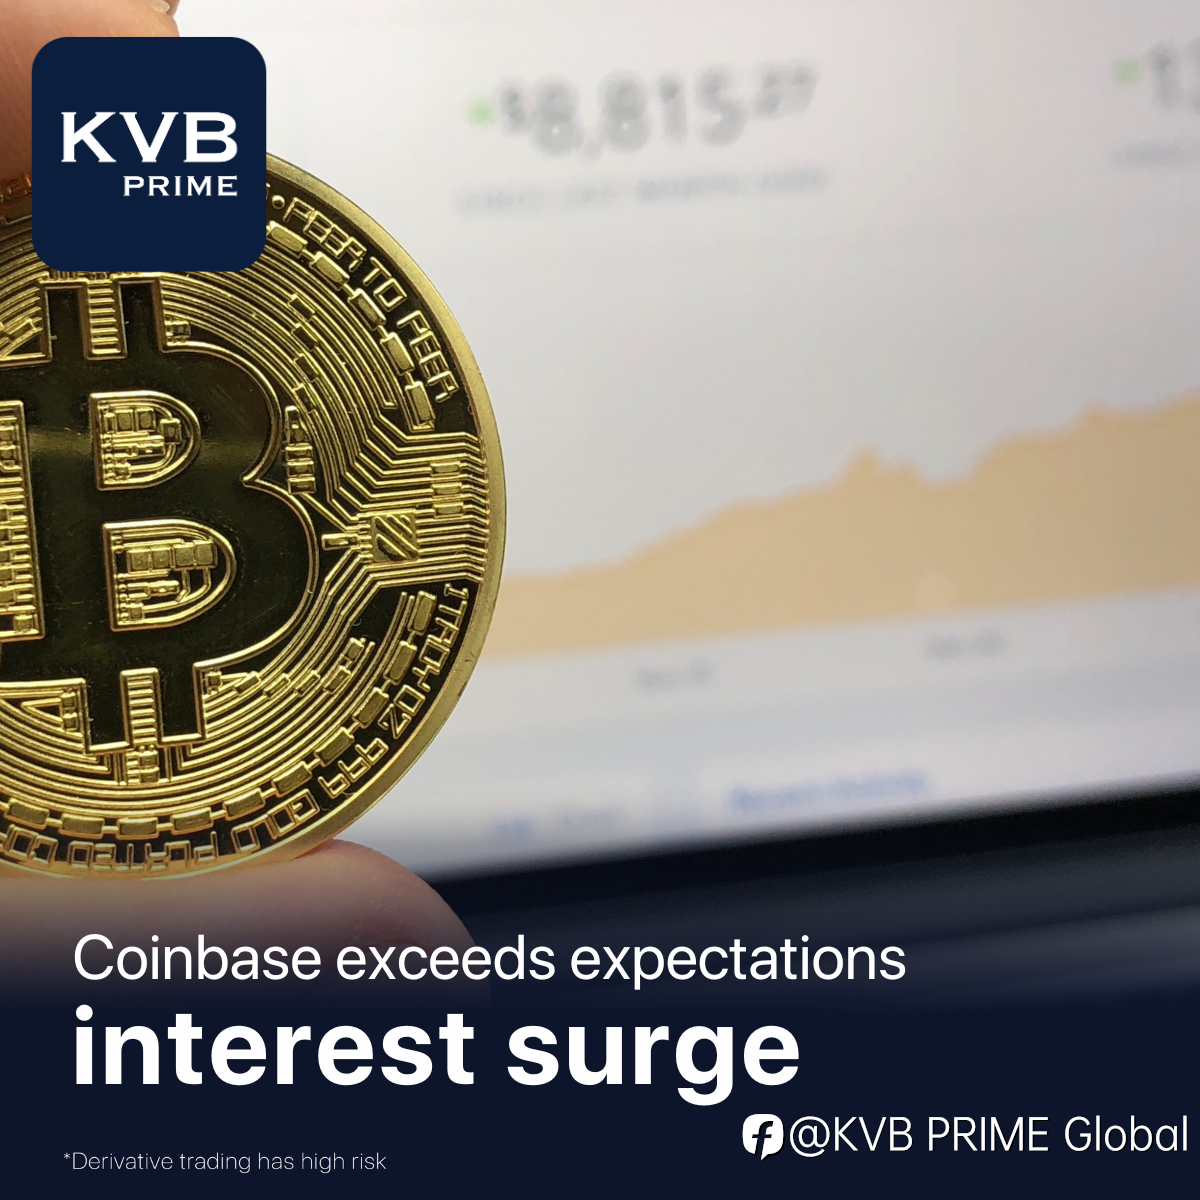 Coinbase exceeds expectations as interest income experiences a surge